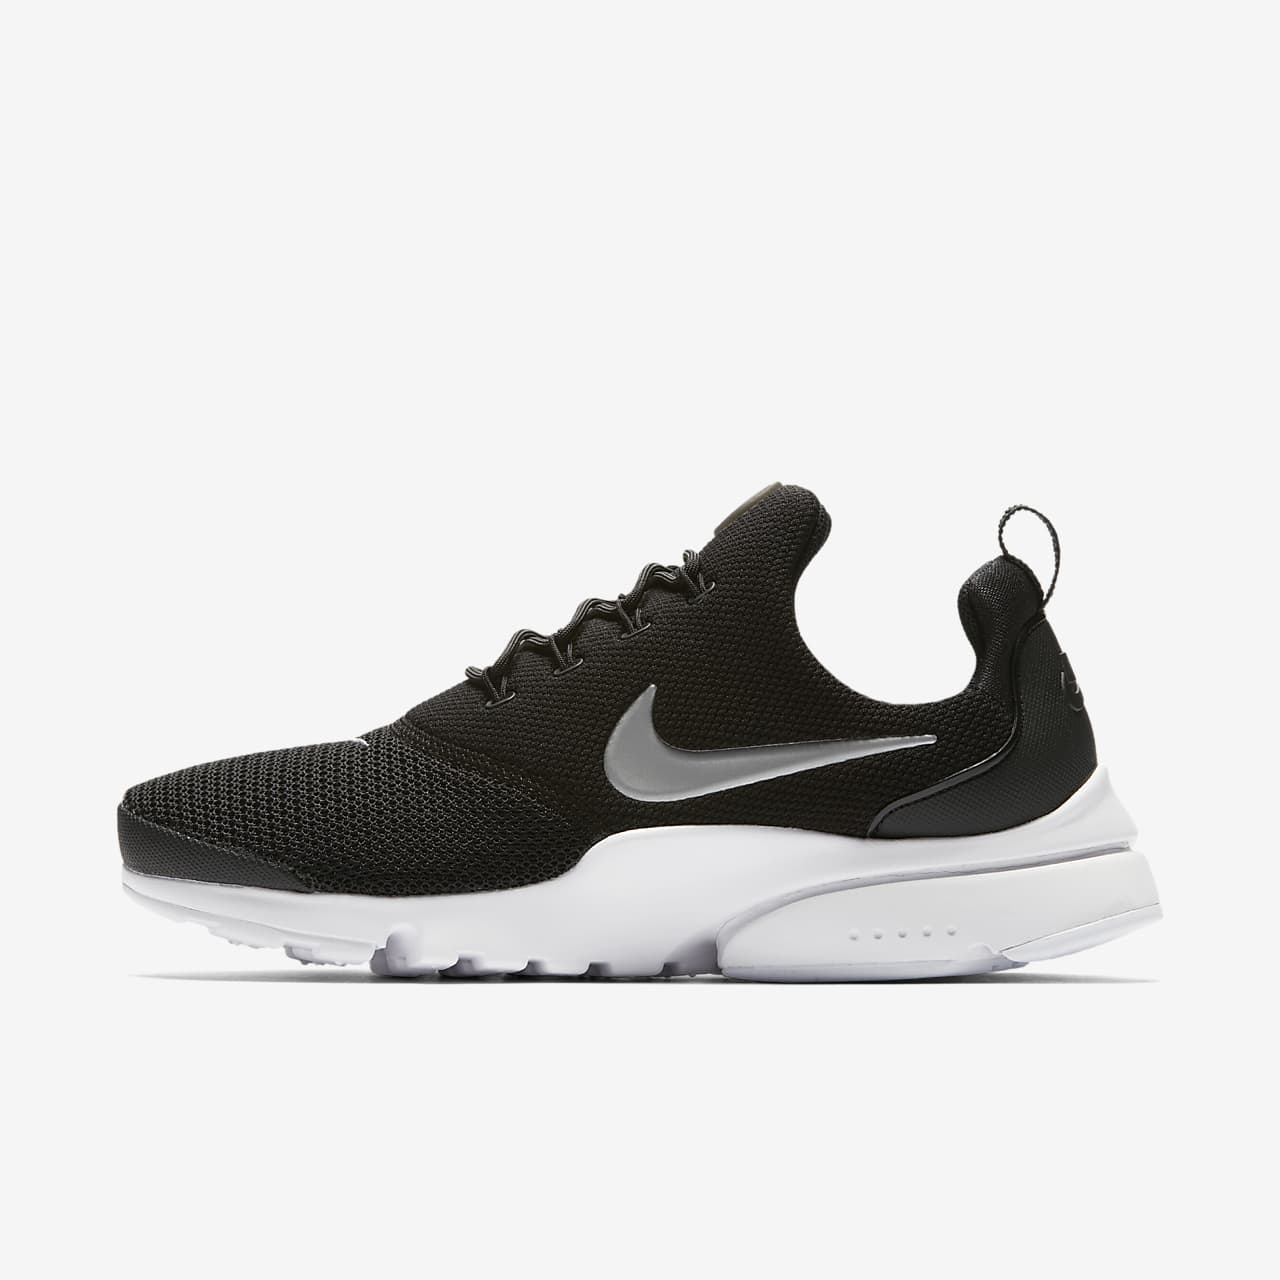 Chaussure Nike Presto Fly pour Femme